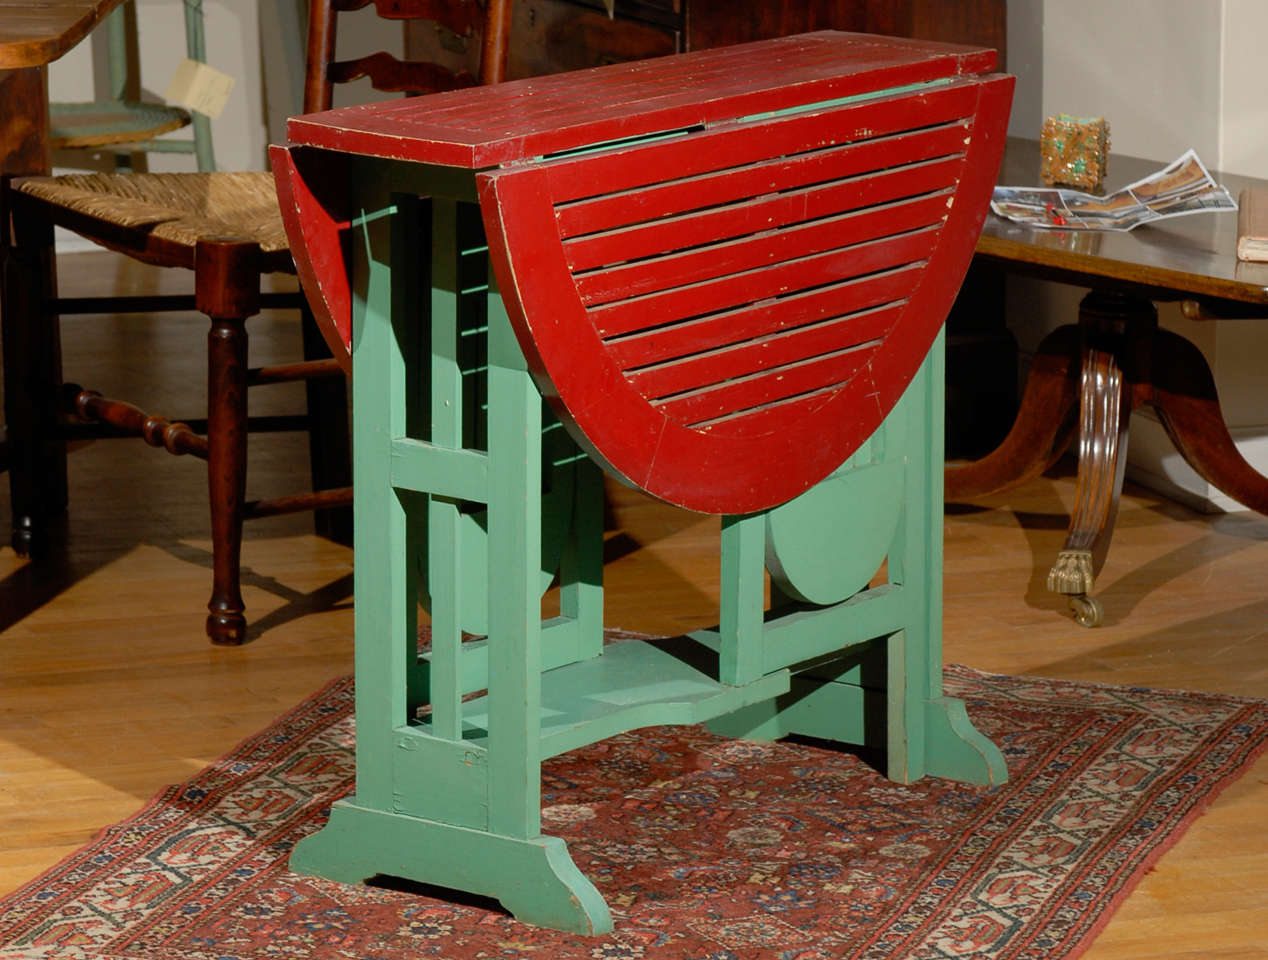 This is a fabulous table.  The table is in the gate leg style.  The soft green legs fold out for either a round table or semicircle table.  There are two small shelf like stands underneath the two gates.
This table is a wonderful piece of